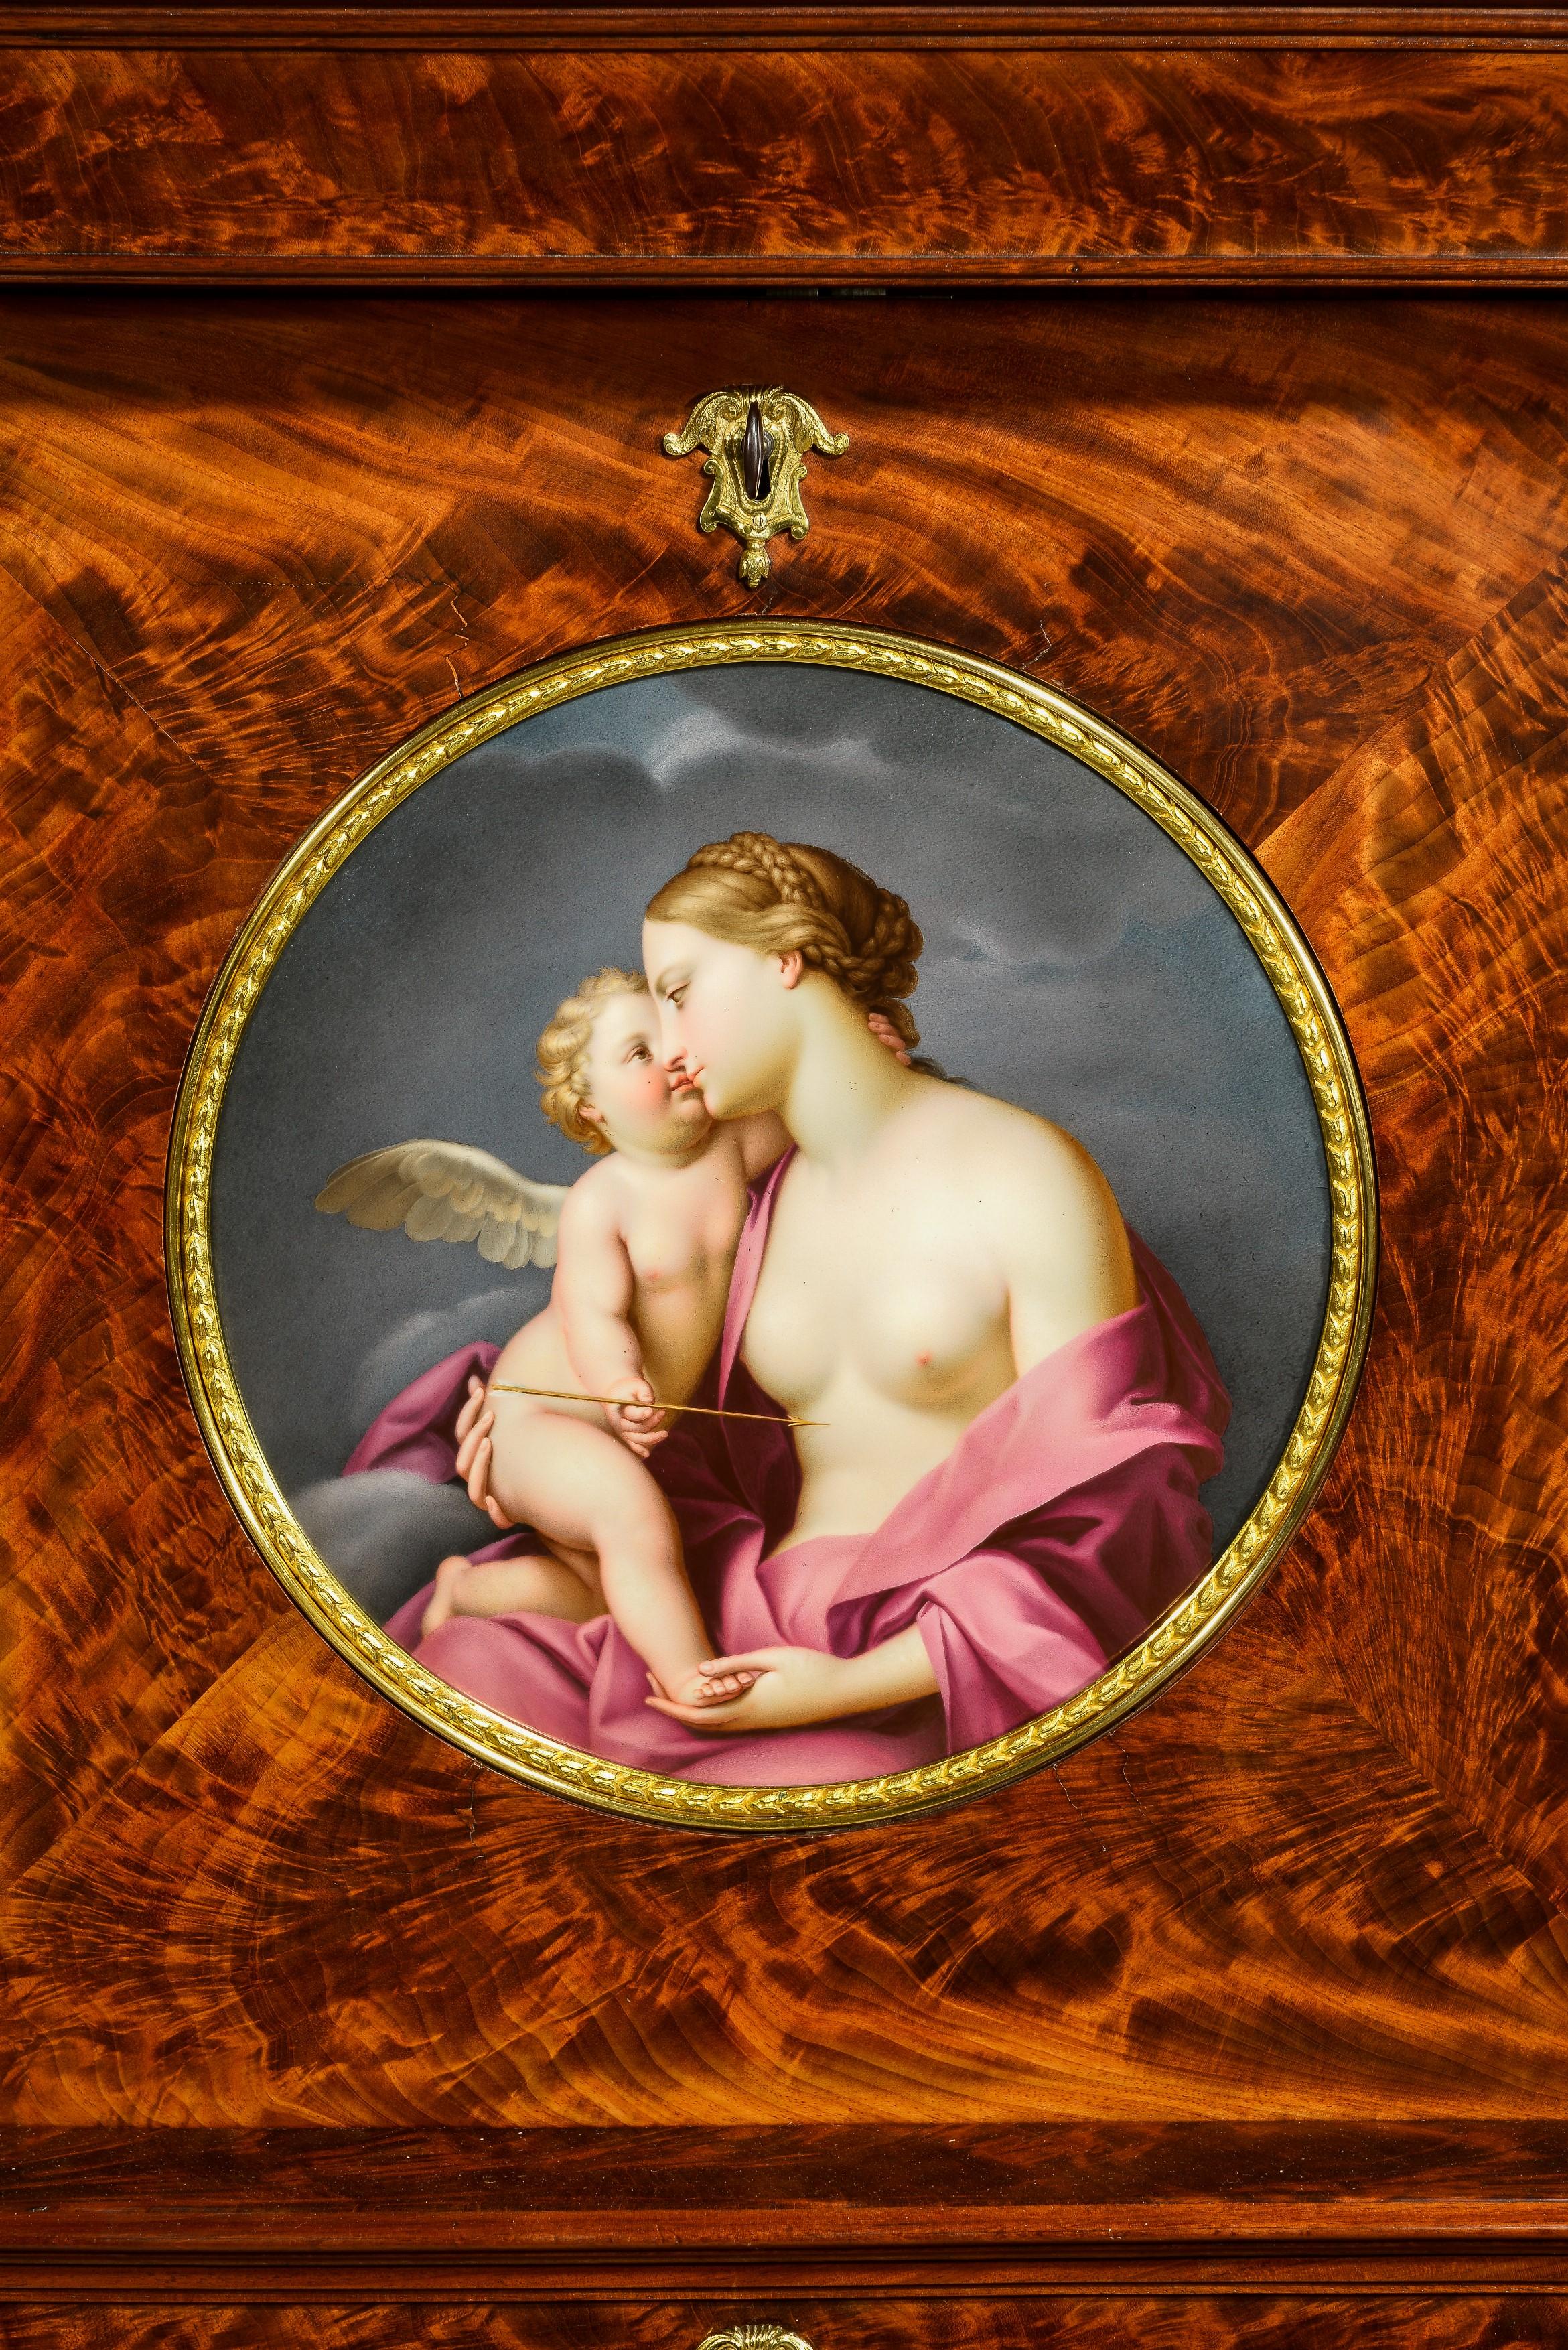 English Ormolu-Mounted Mahogany Secrétaire by S. Jamar with Porcelain Plaque For Sale